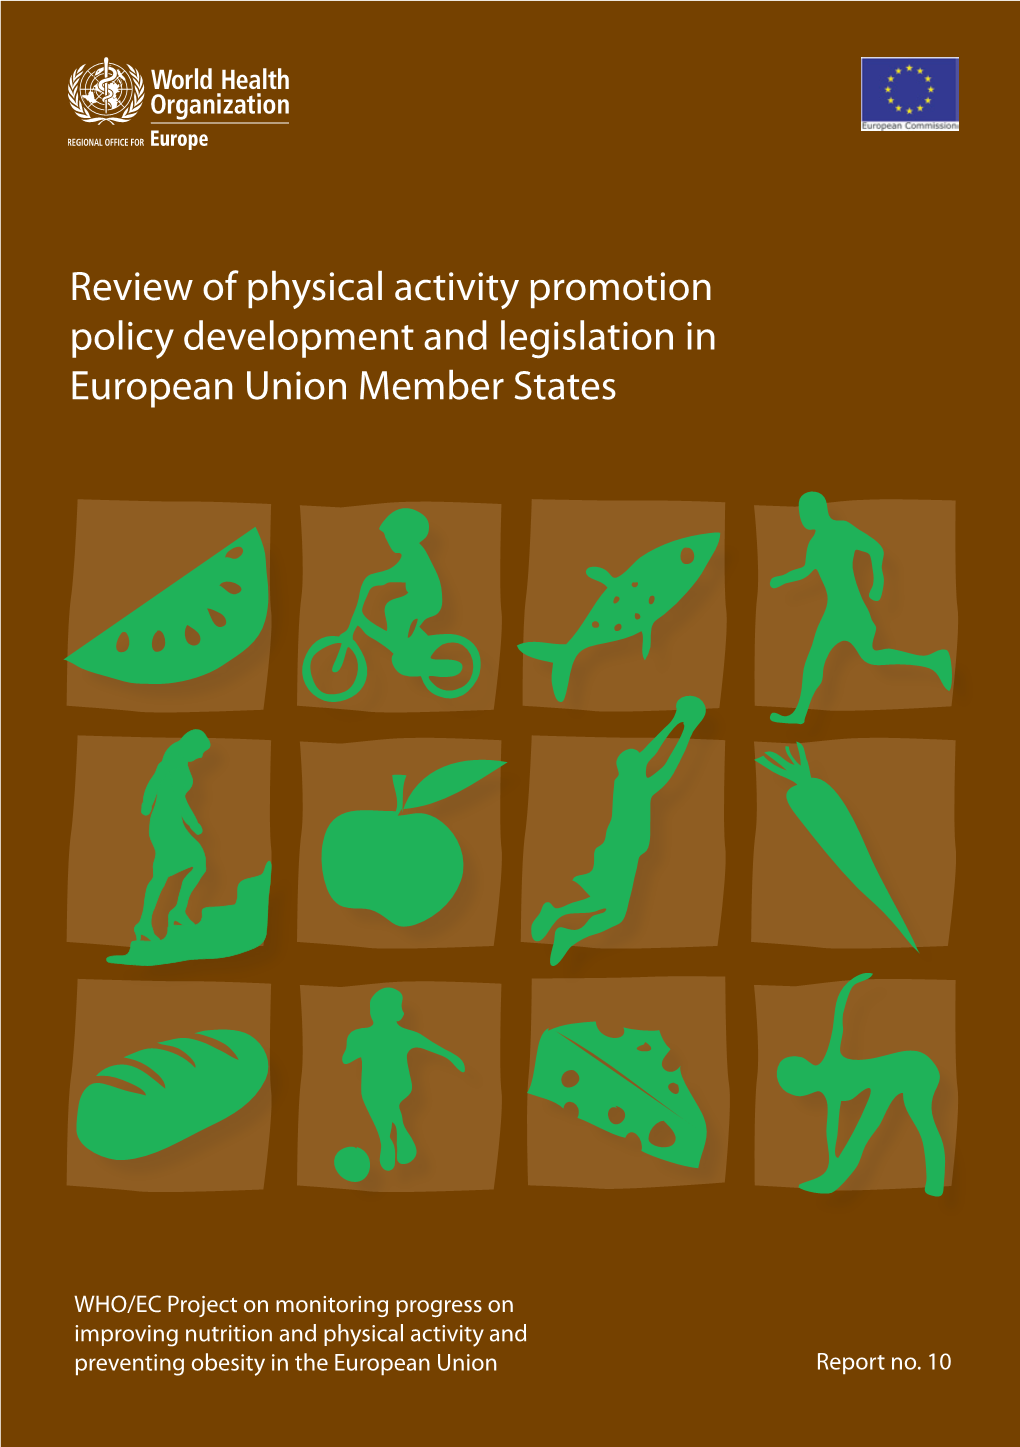 Review of Physical Activity Promotion Policy Development and Legislation in European Union Member States